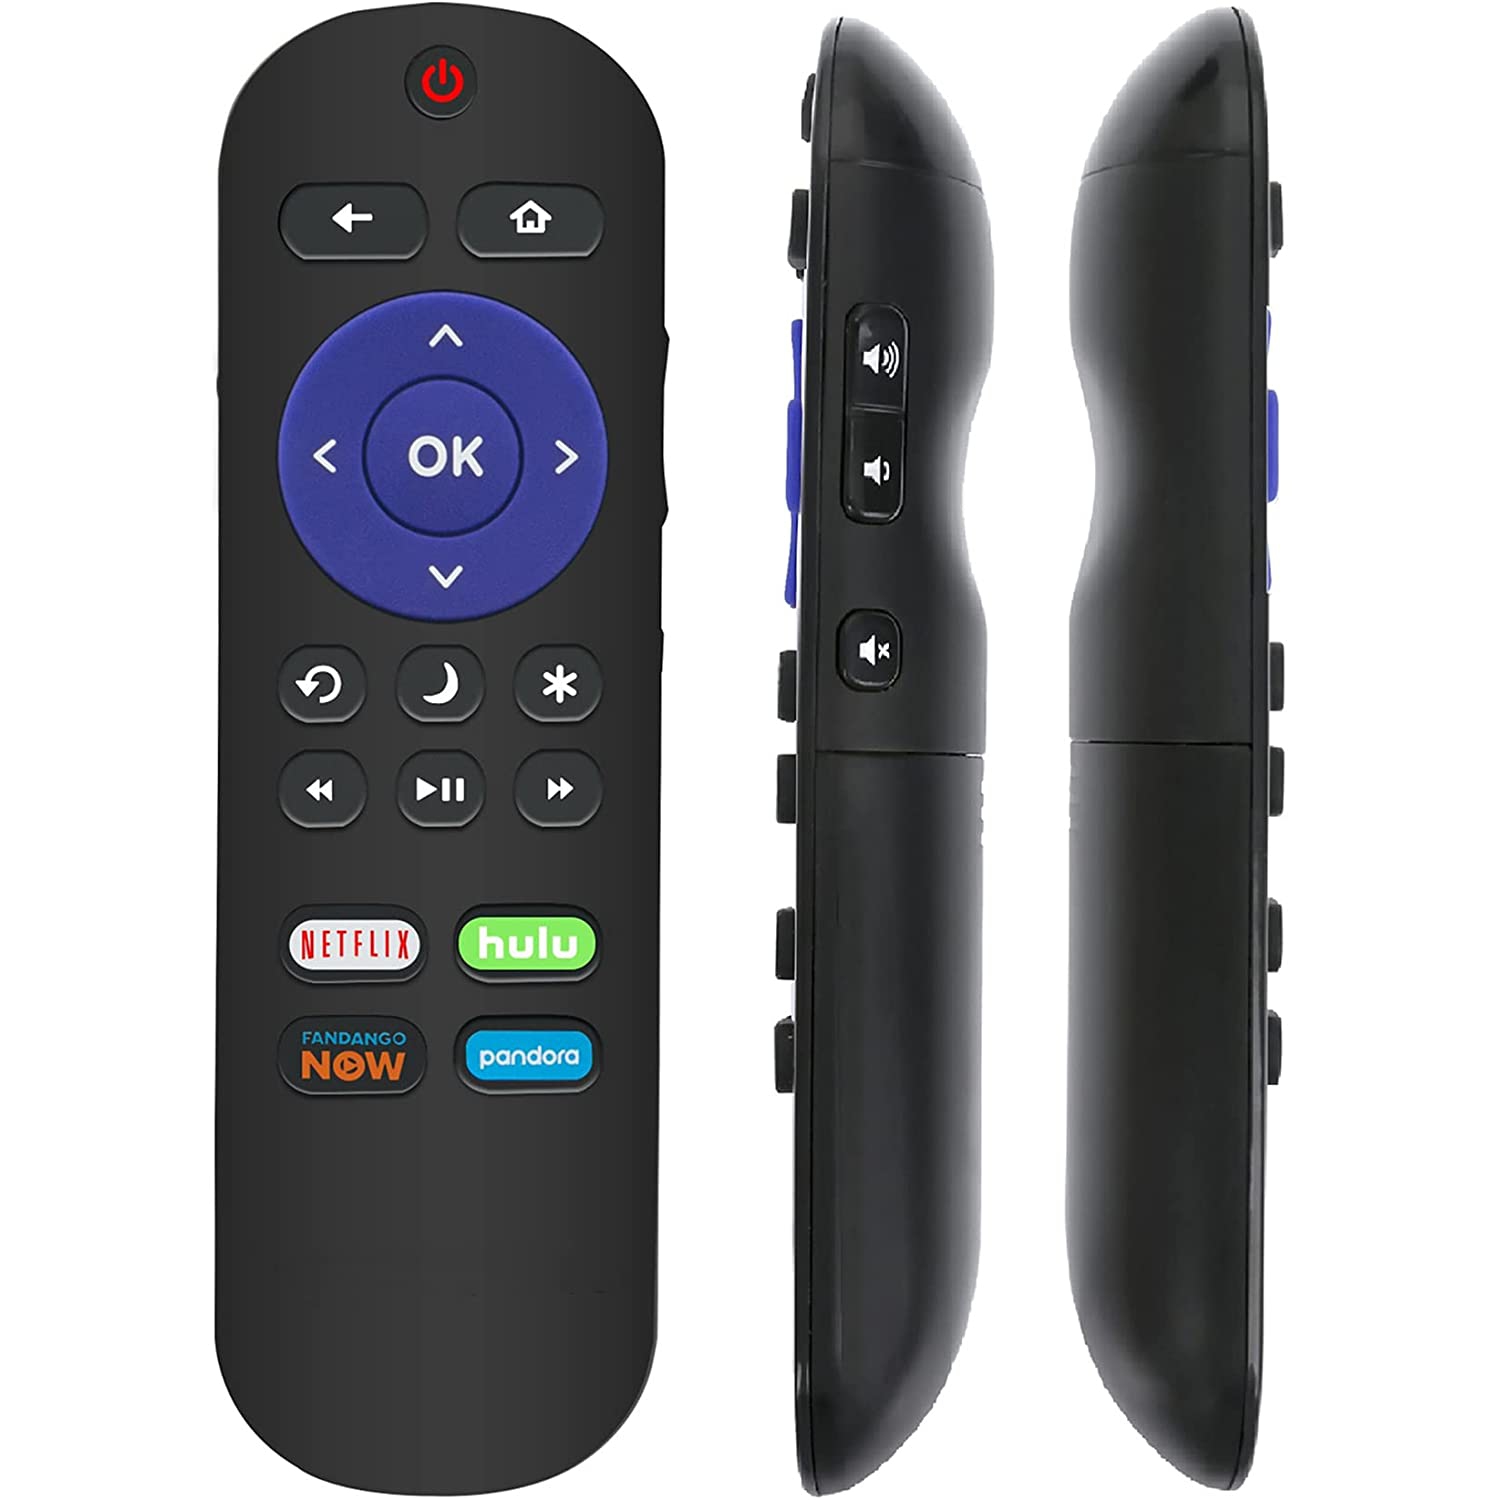 New Relaced Remote Control fit for RCA Roku TV RTRU5527 RTR5060 RTR5061 101018E0006 RTR4360 RTR4361 RTR4360US RTR3260